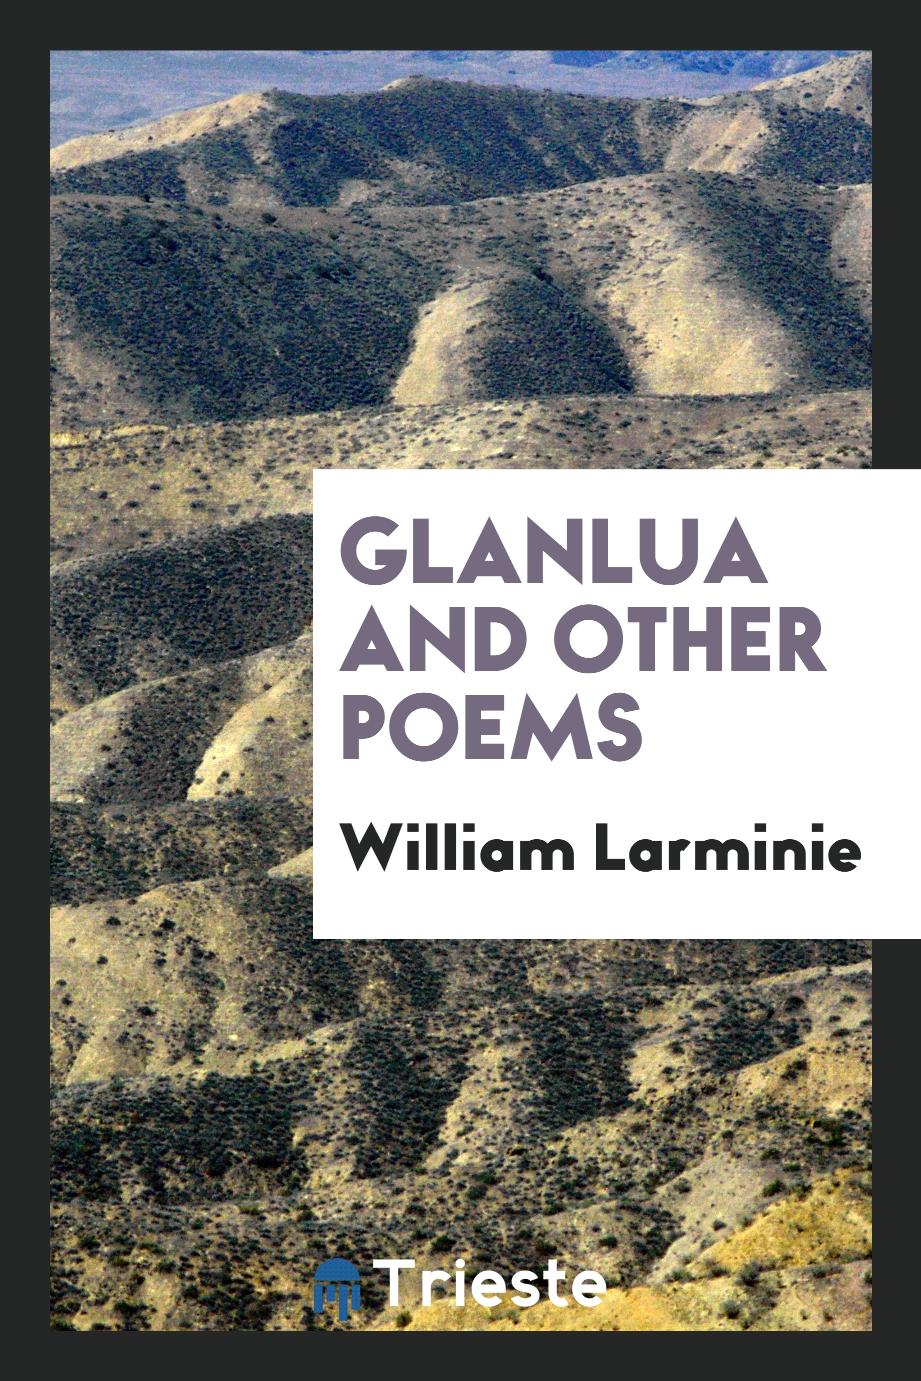 Glanlua and Other Poems